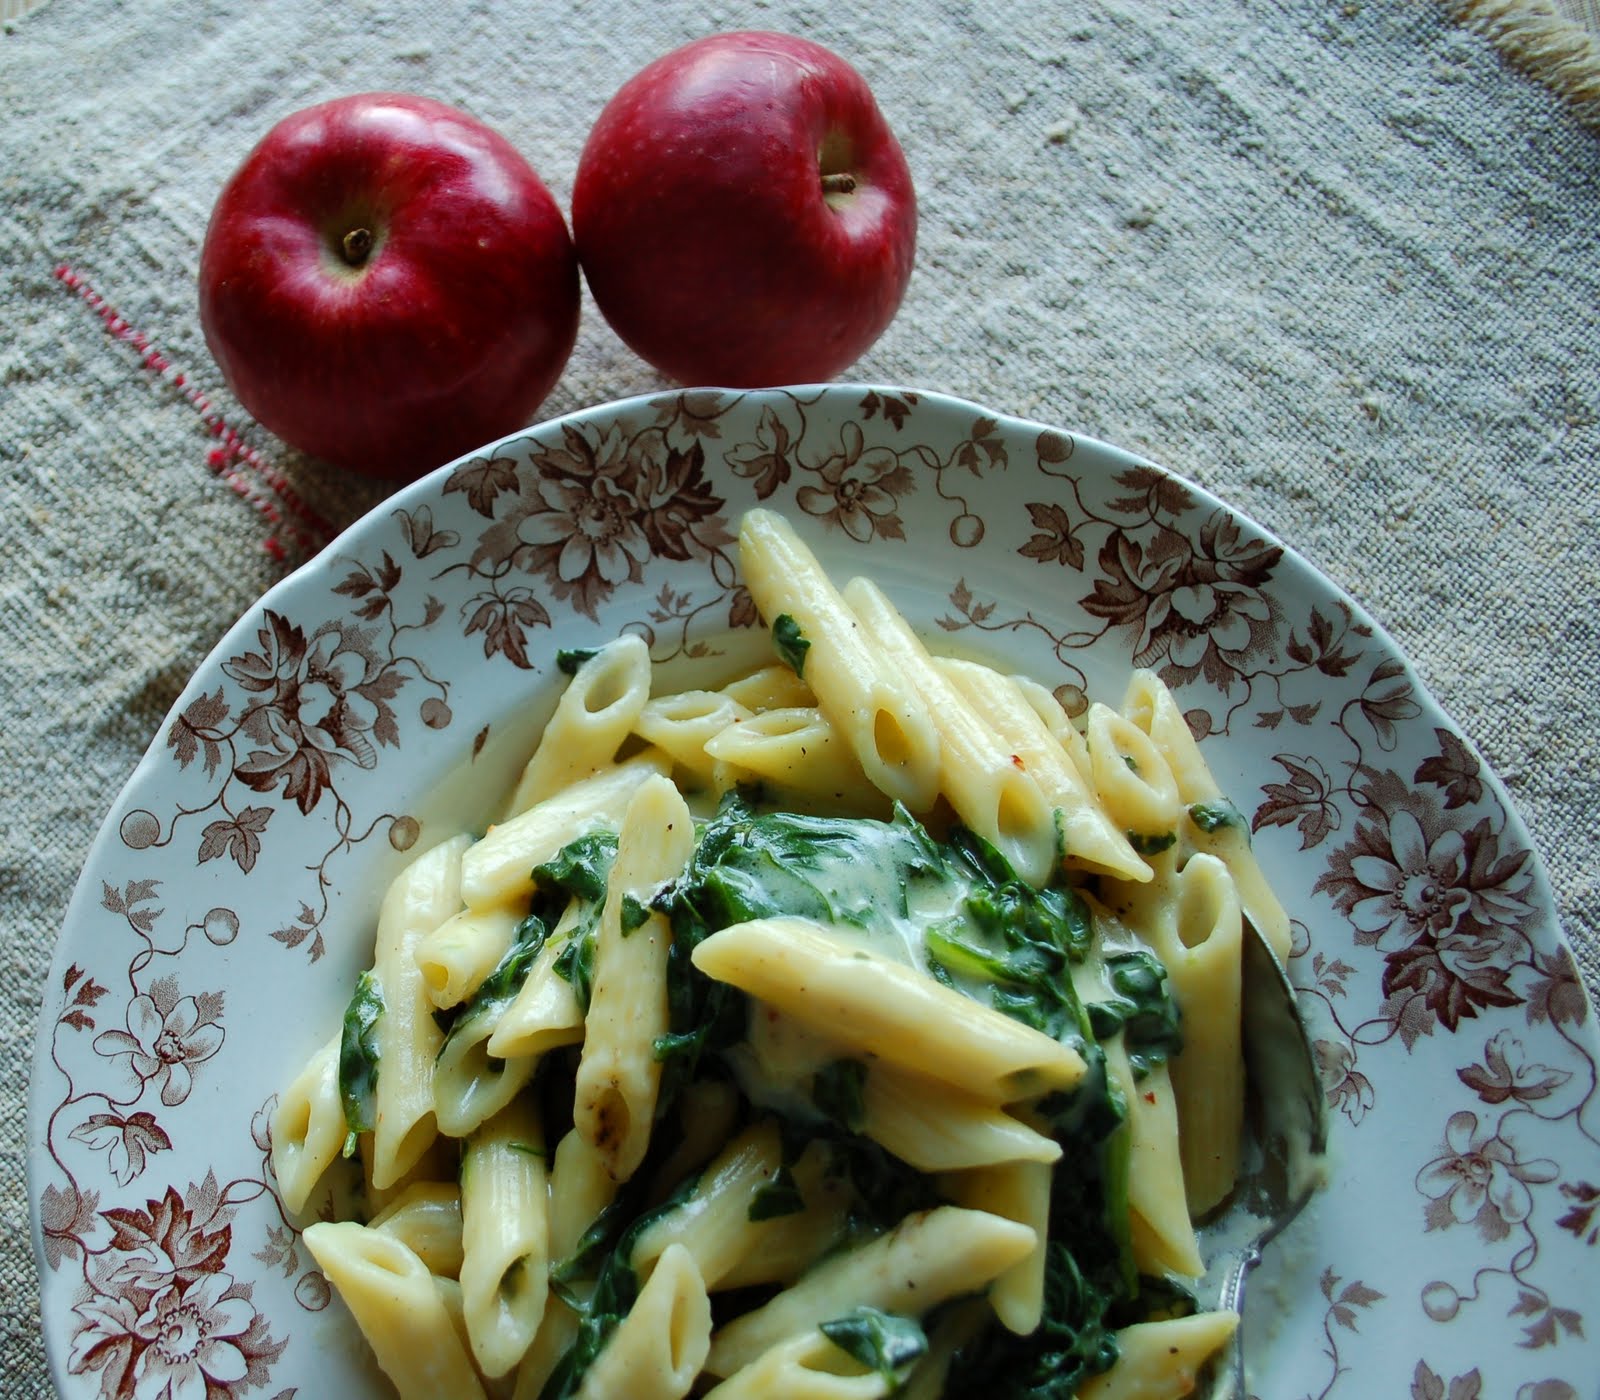 The Spice Garden: Penne and Spinach in Cream Sauce